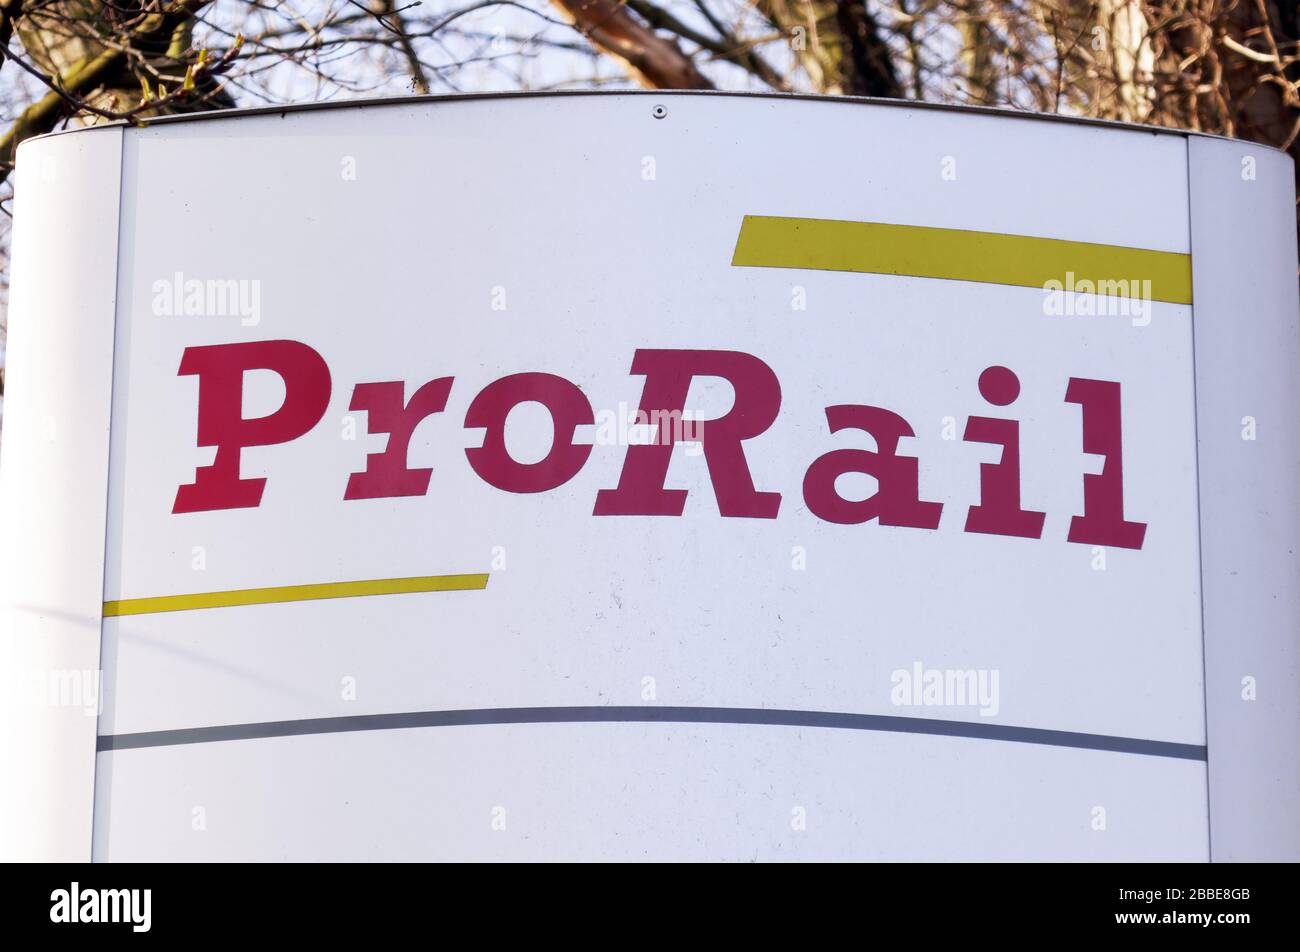 The Hague, Netherlands 18 february 2020; Prorail sign in the Hague in the Netherlands Stock Photo